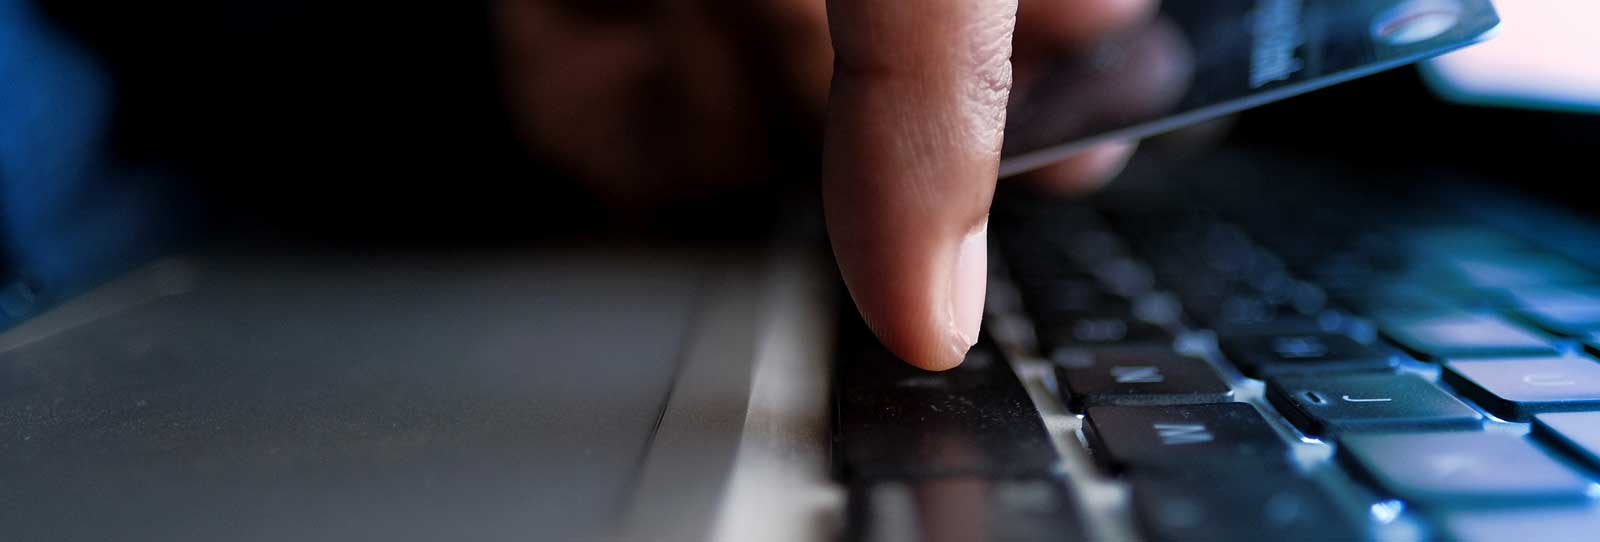 Single finger pressing down on a keyboard from above with the other hand holding a card  in the background